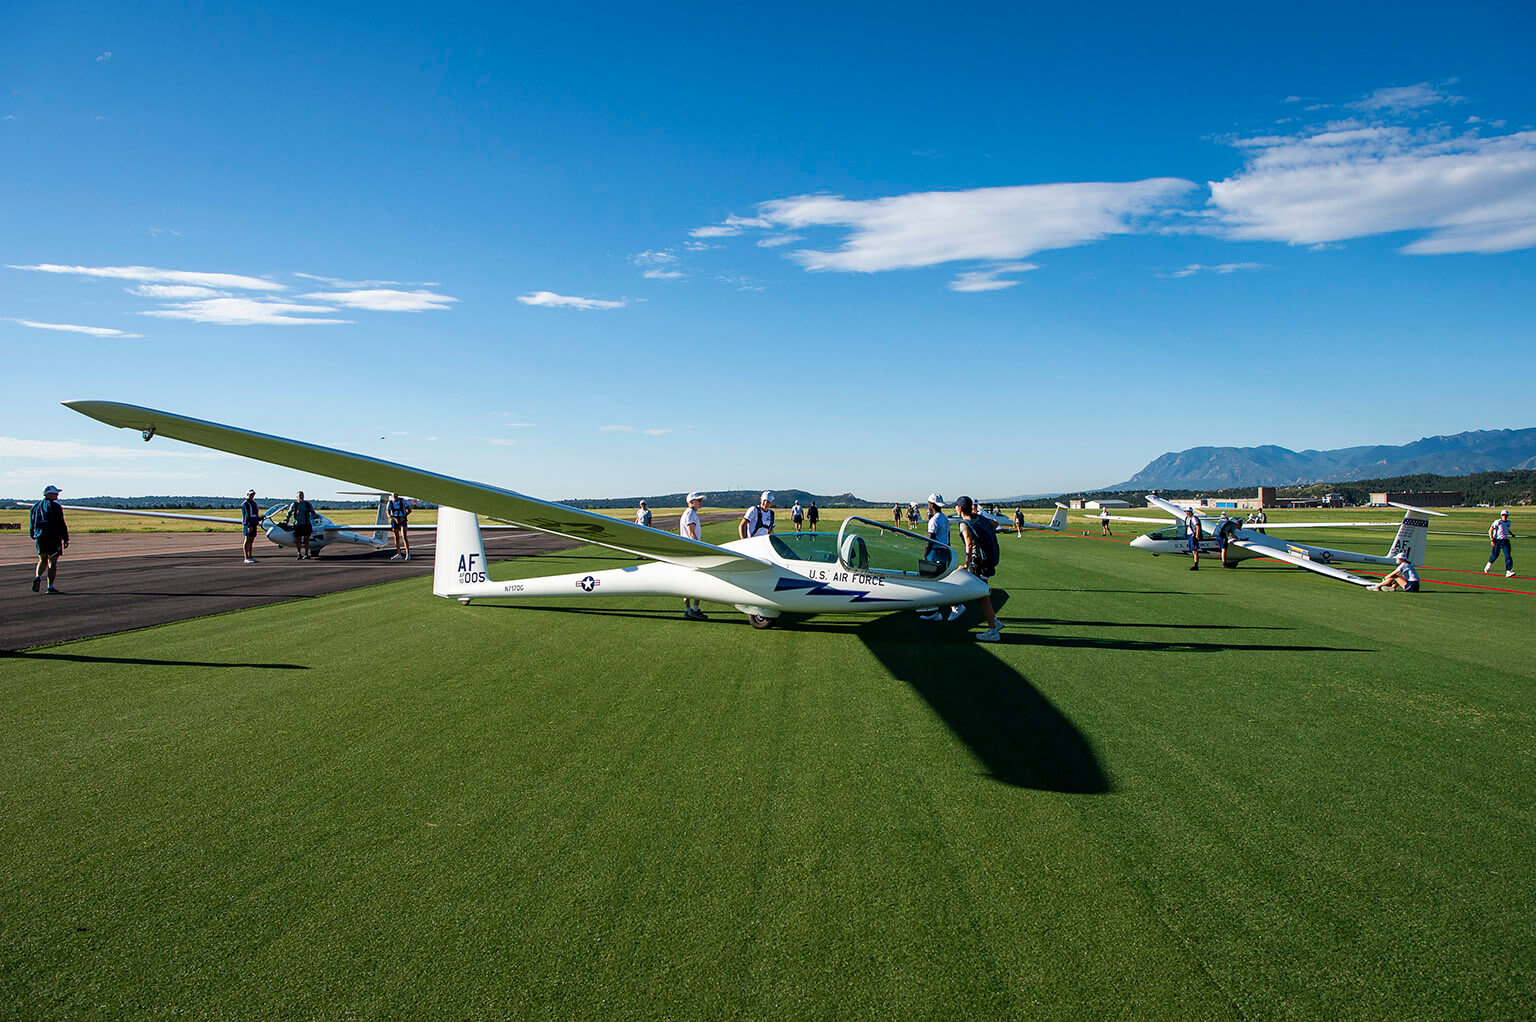 U.S. Air Force Academy cadets prepare to launch TG-15 and TG-16 glider aircraft